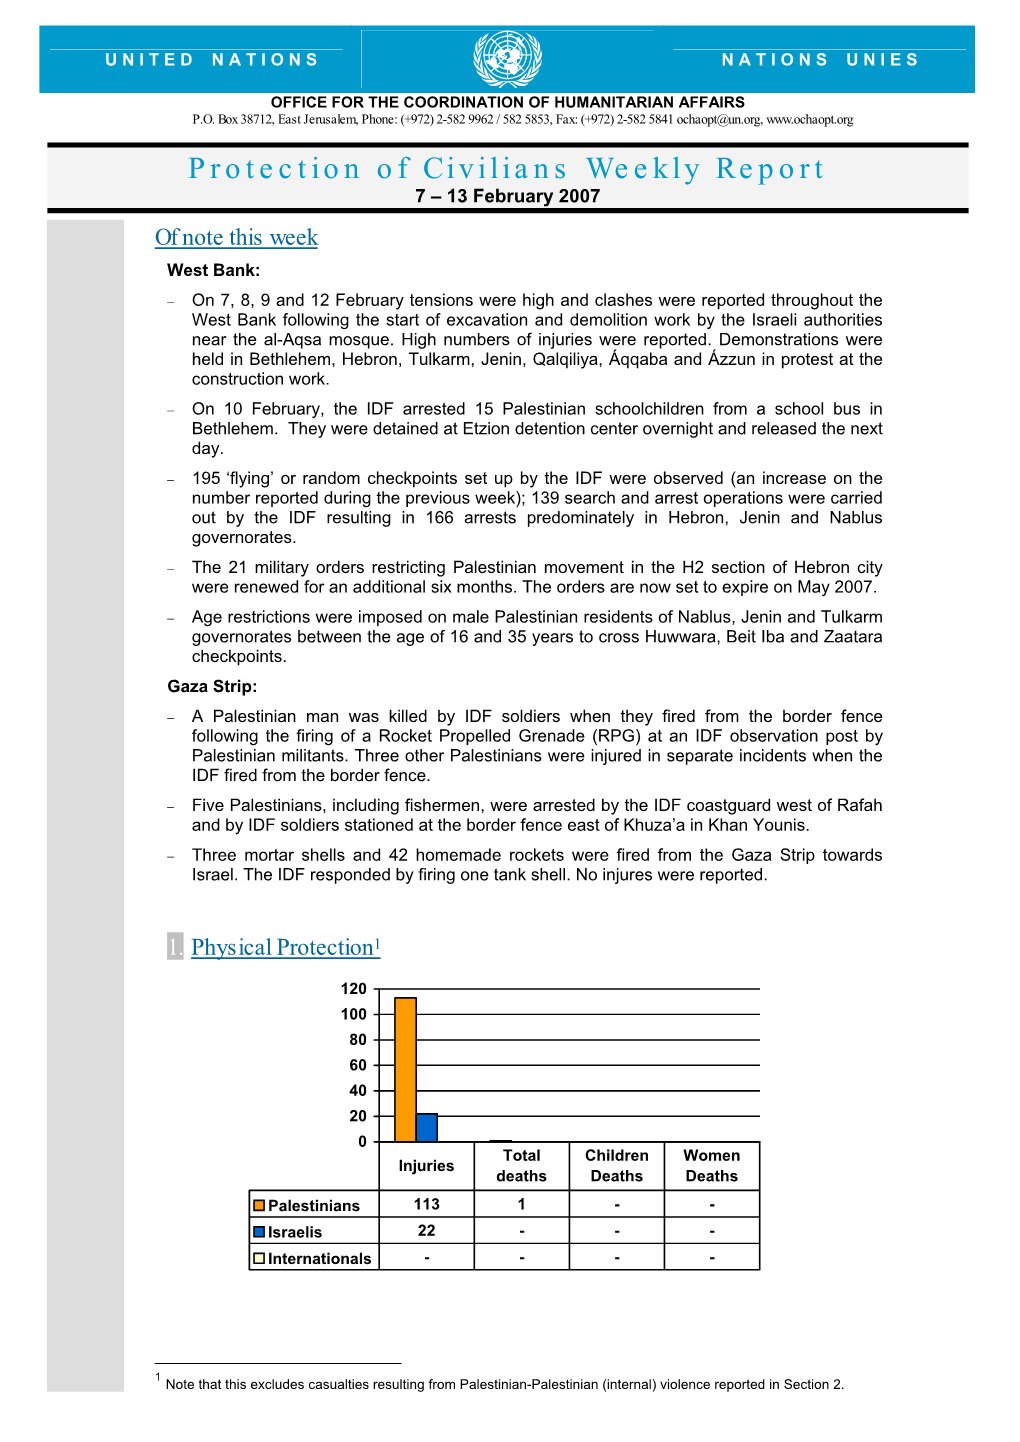 Protection of Civilians Weekly Report 7 – 13 February 2007 of Note This Week West Bank